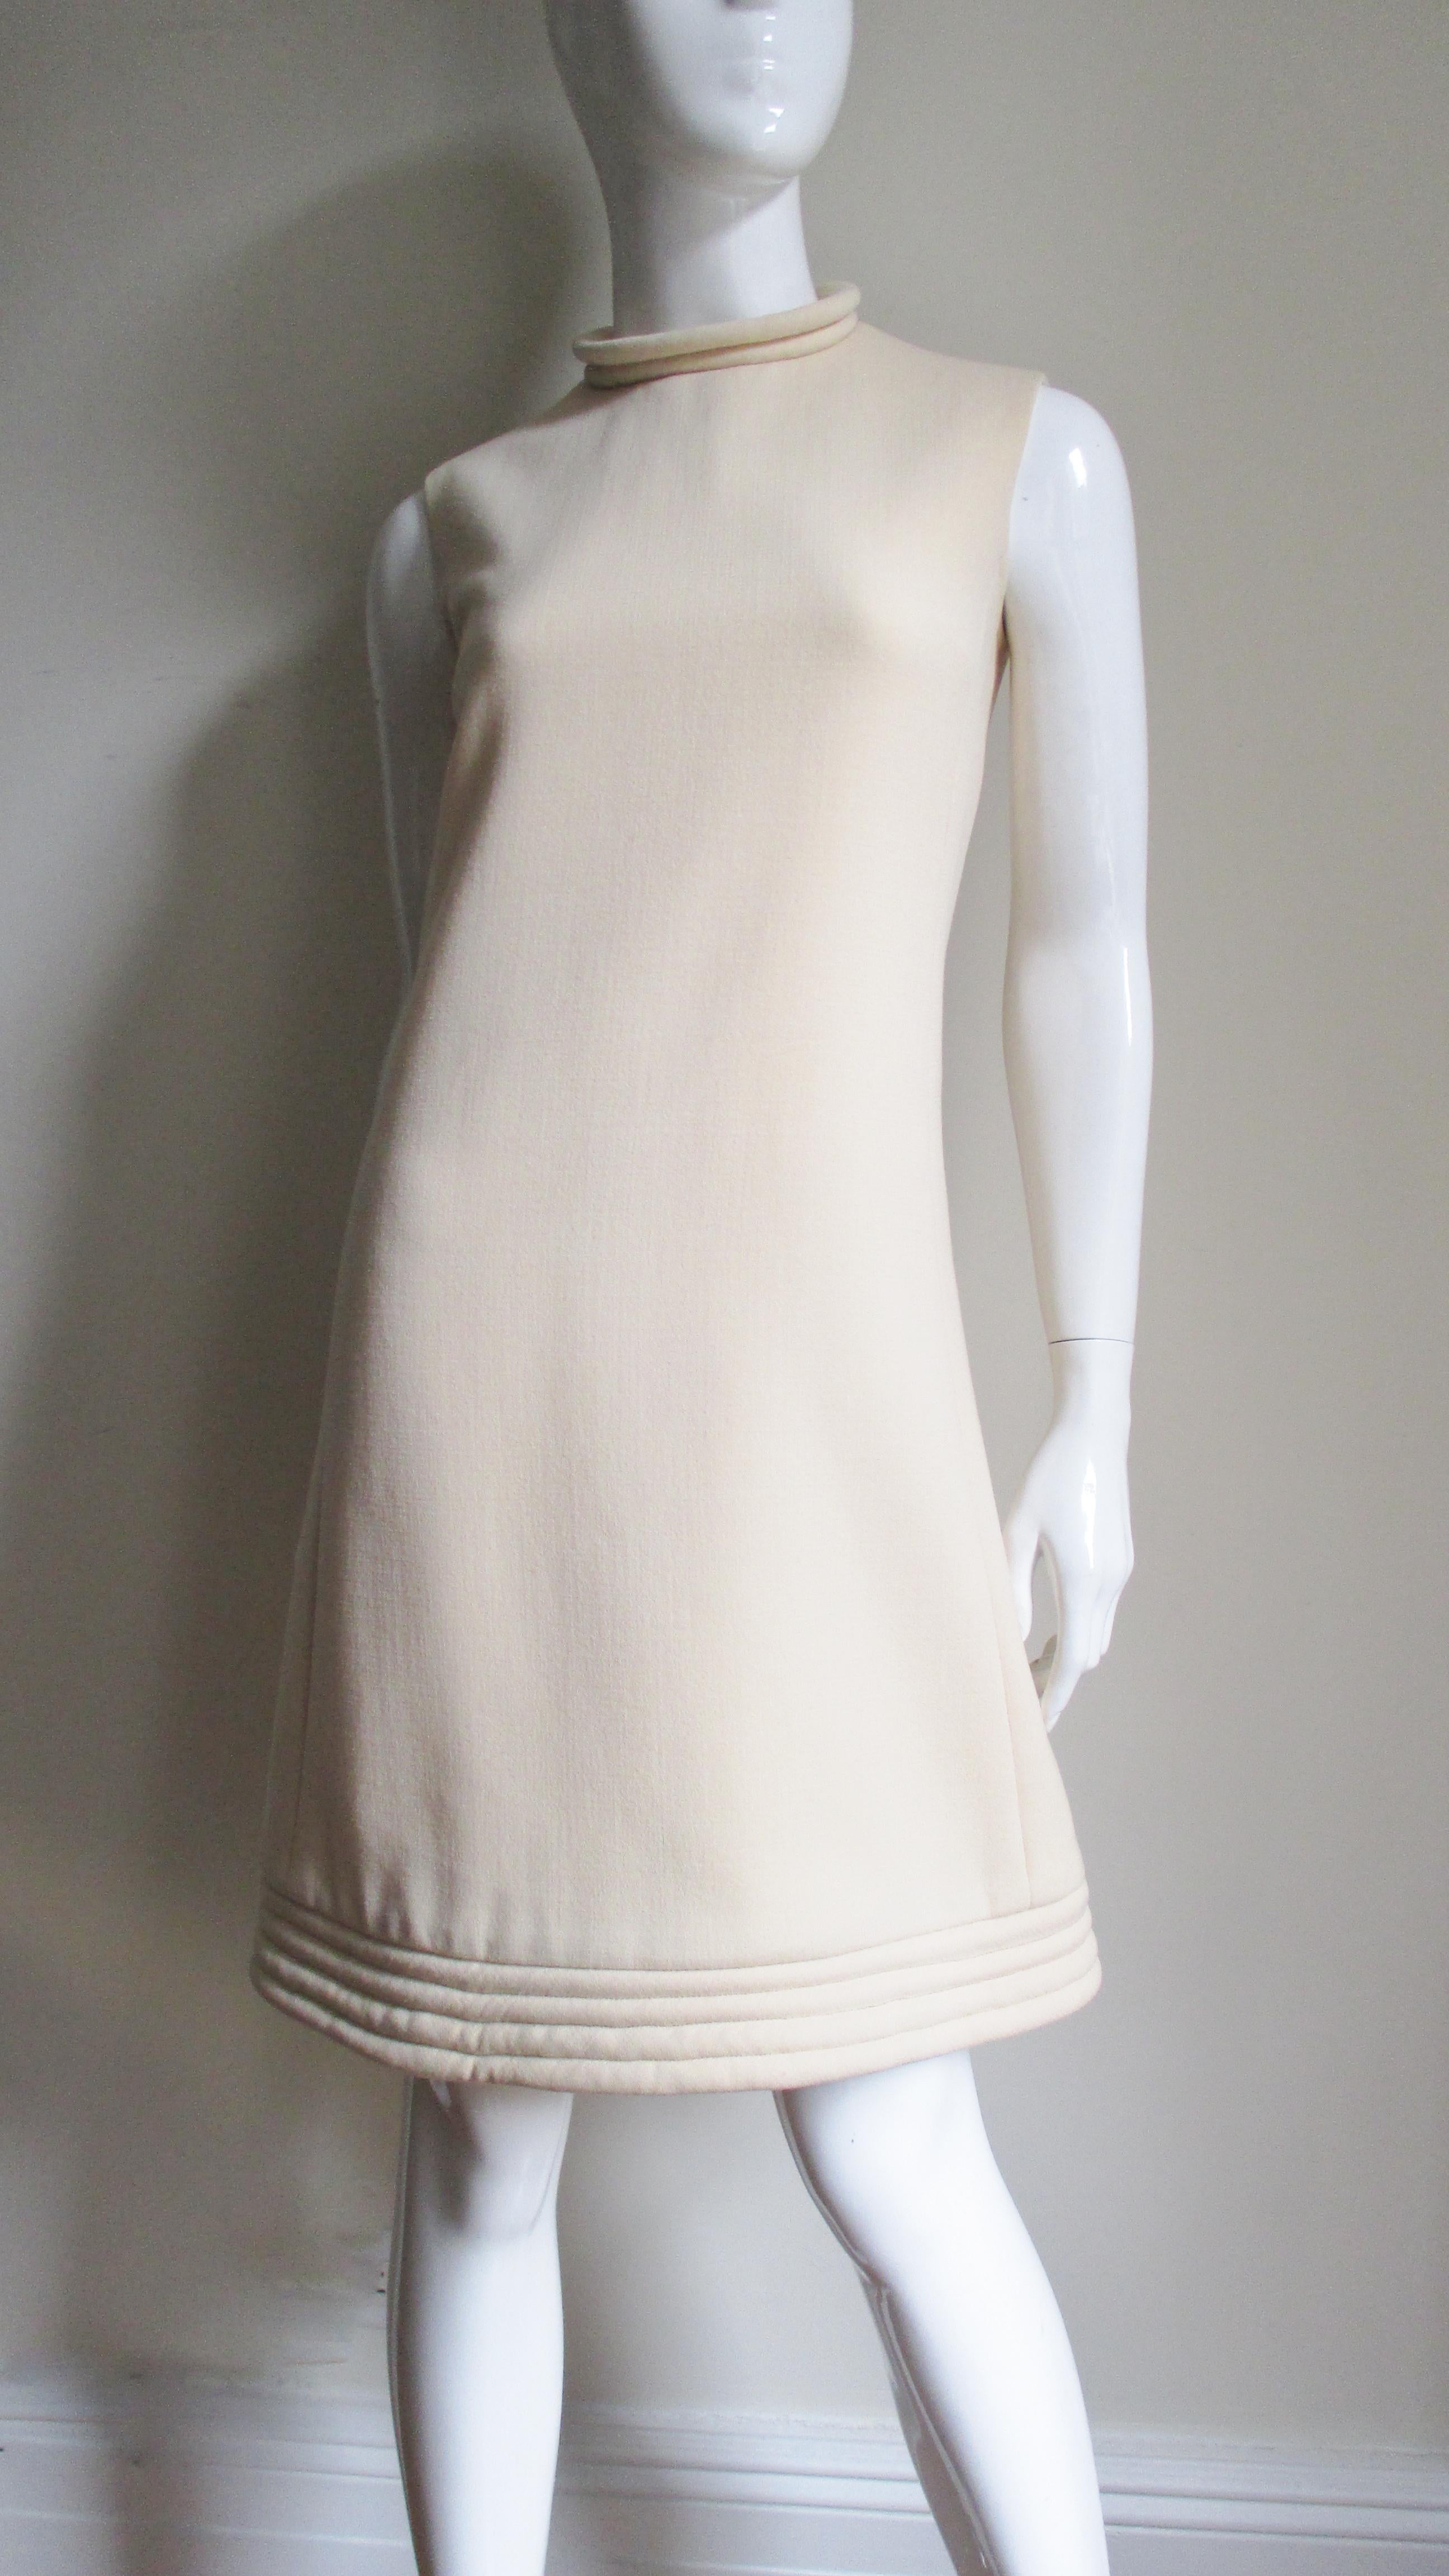 A fabulous off white wool dress by Pierre Cardin. It is an A line sleeveless dress with a stand up collar and hem highlighted with rows of top stitching around their circumferences.  It is lined in off white and has a center back hand sewn metal